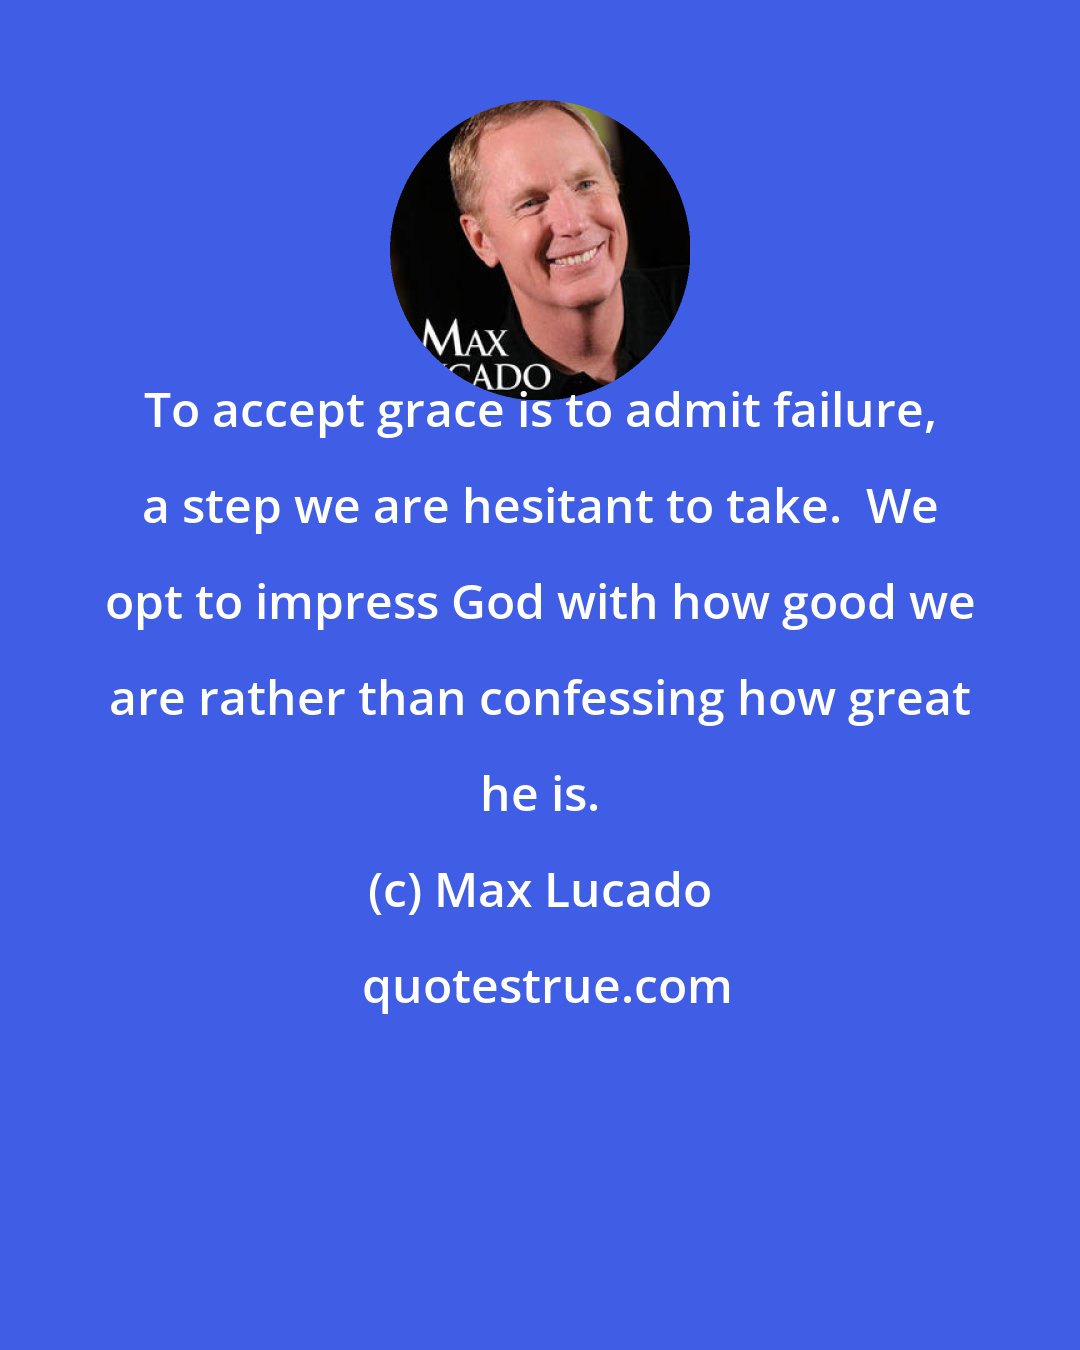 Max Lucado: To accept grace is to admit failure, a step we are hesitant to take.  We opt to impress God with how good we are rather than confessing how great he is.